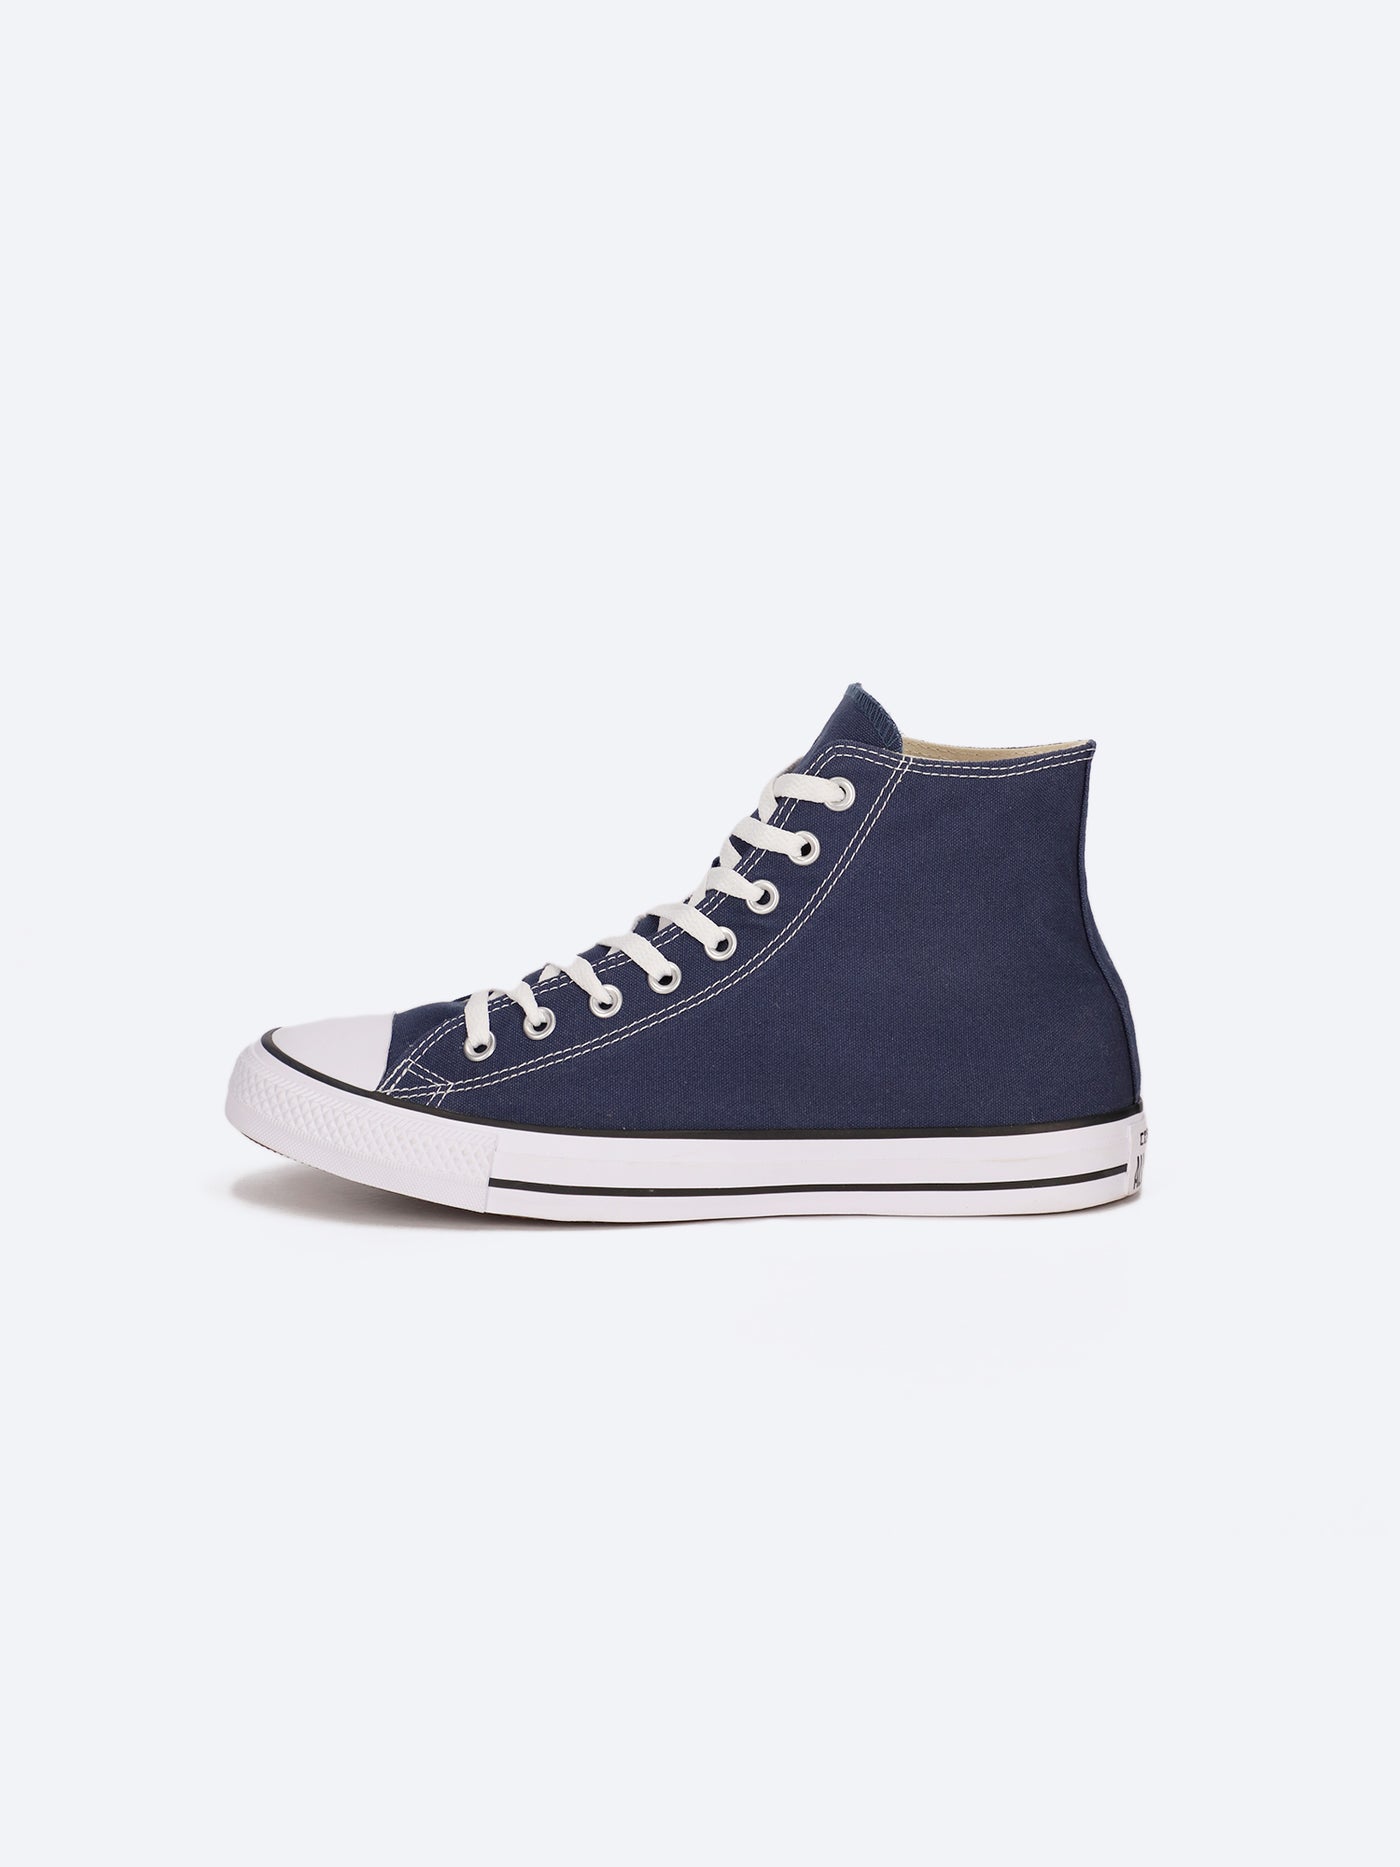 Chuck Taylor All Star High Top Unisex Navy Classic Sneakers